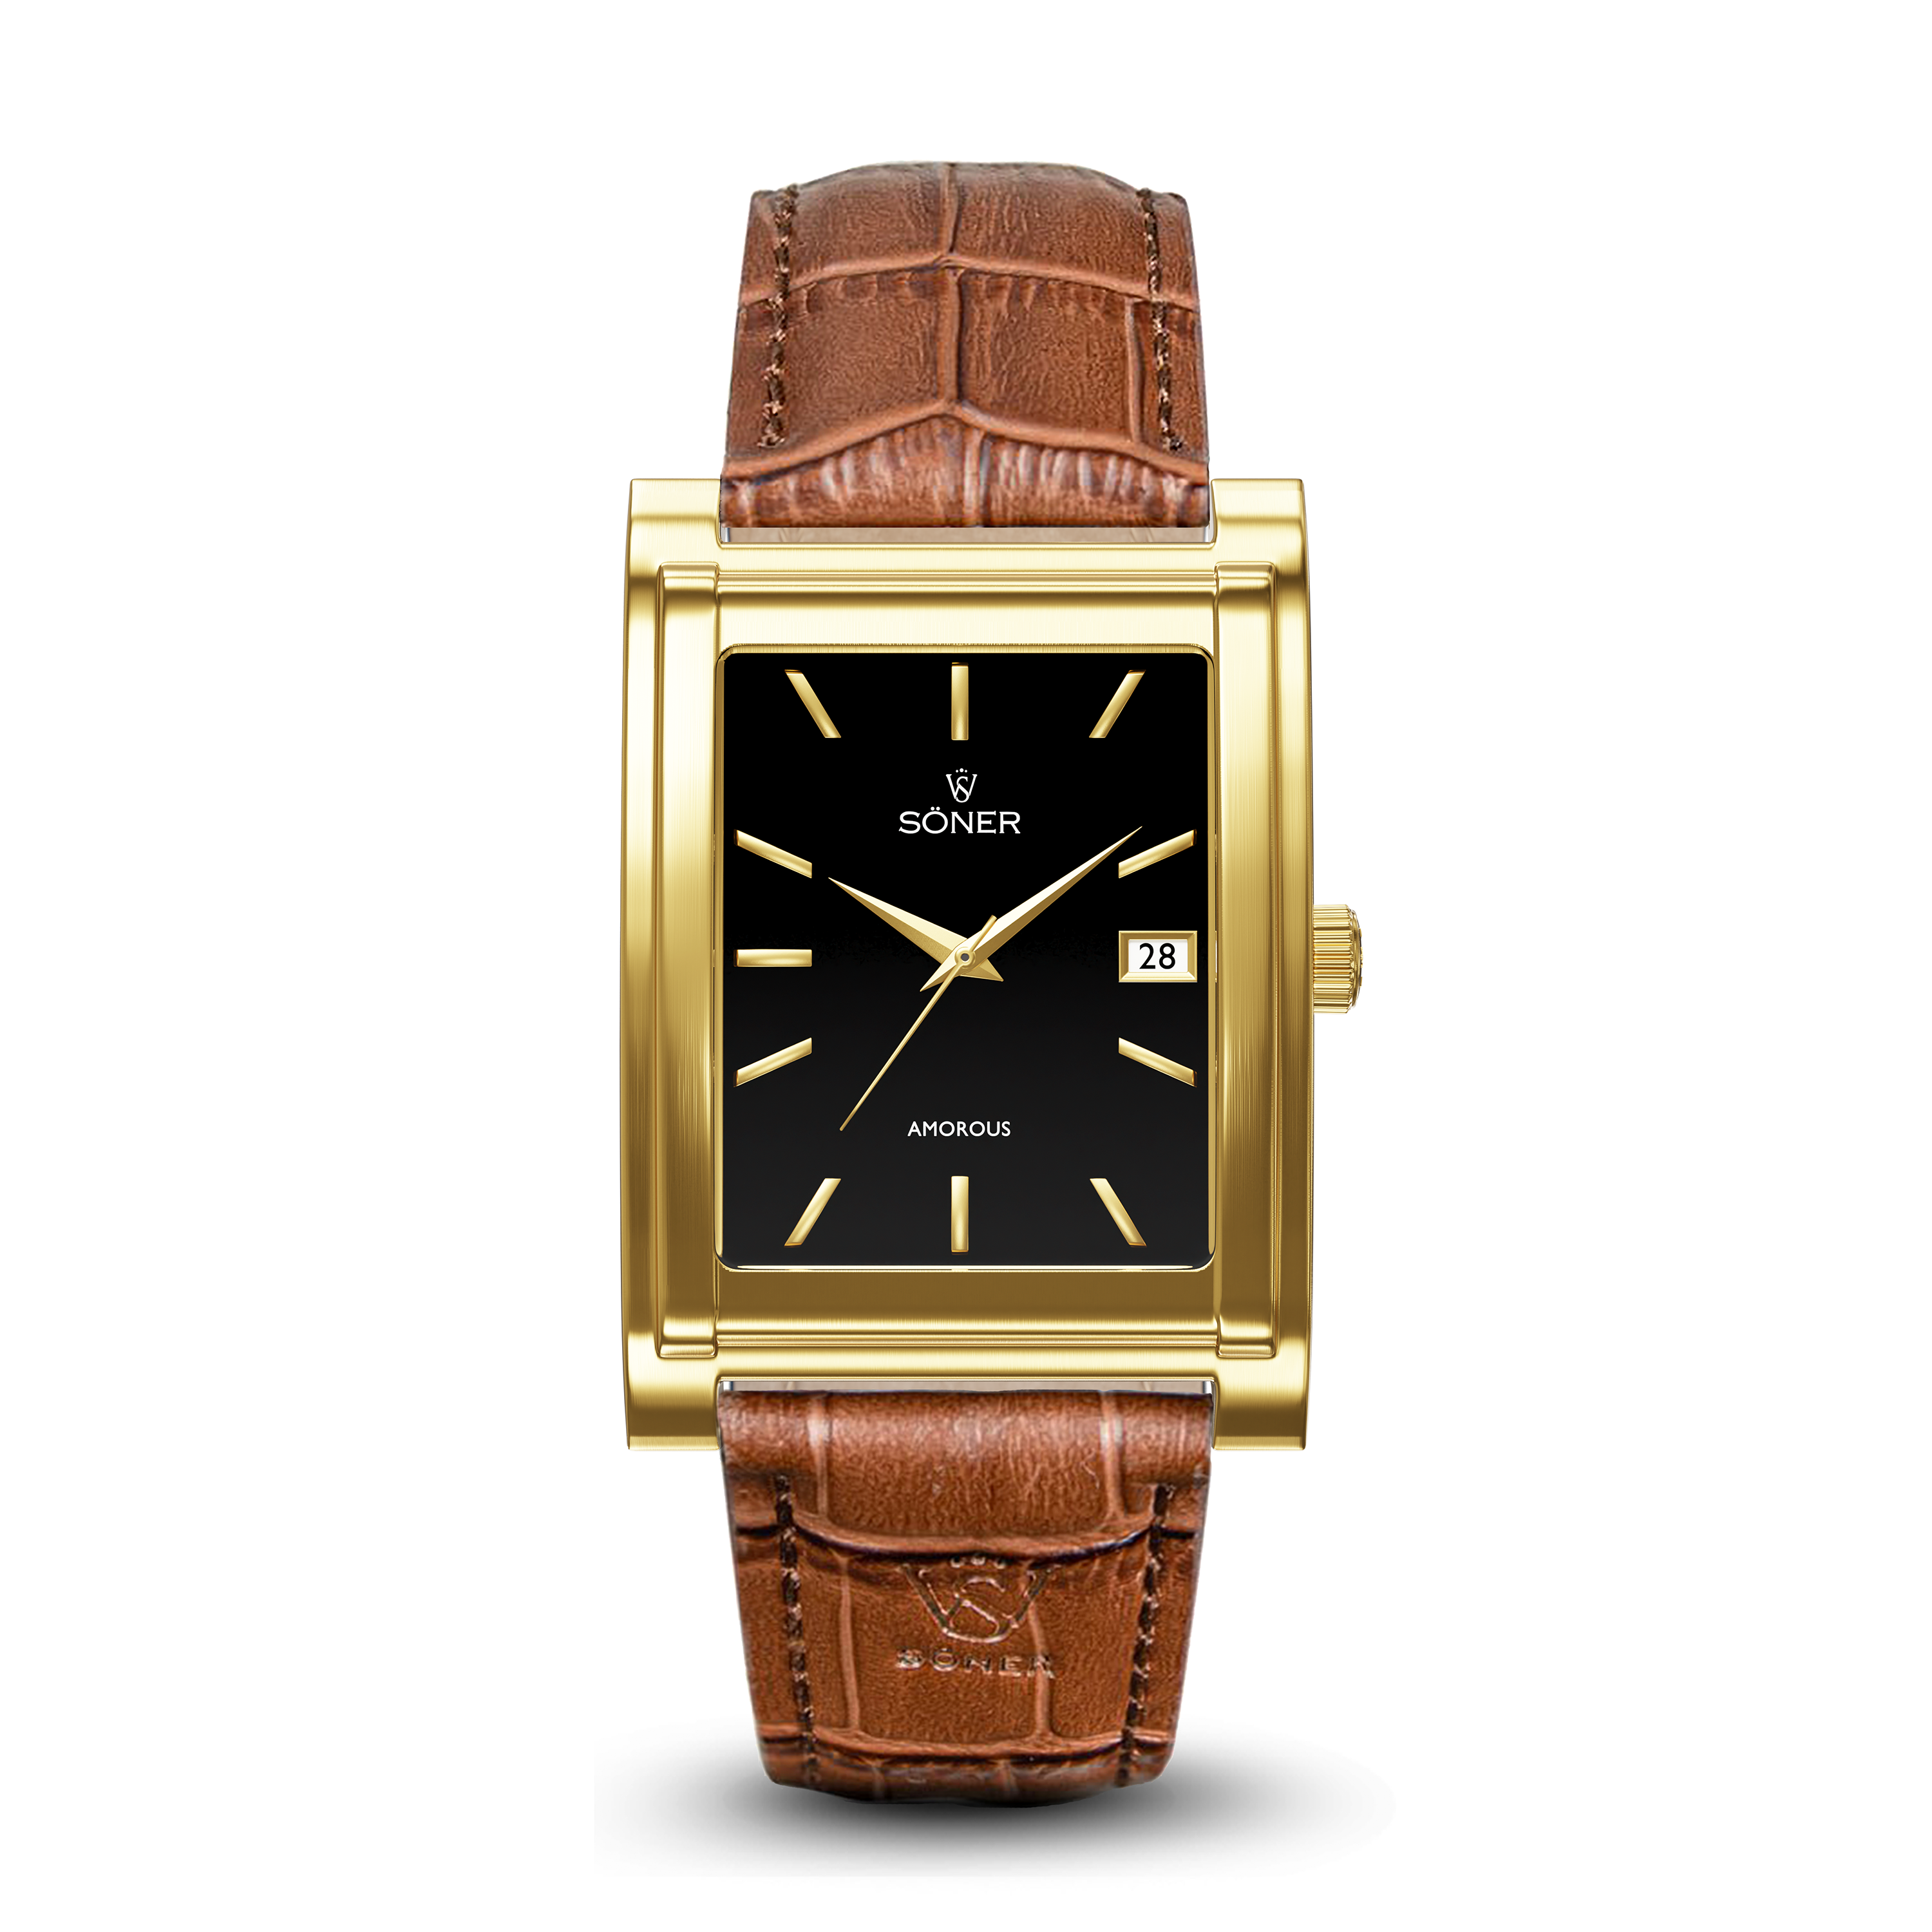 Square automatic watch, Amorous Milano with black dial - brown alligator pattern leather strap front view